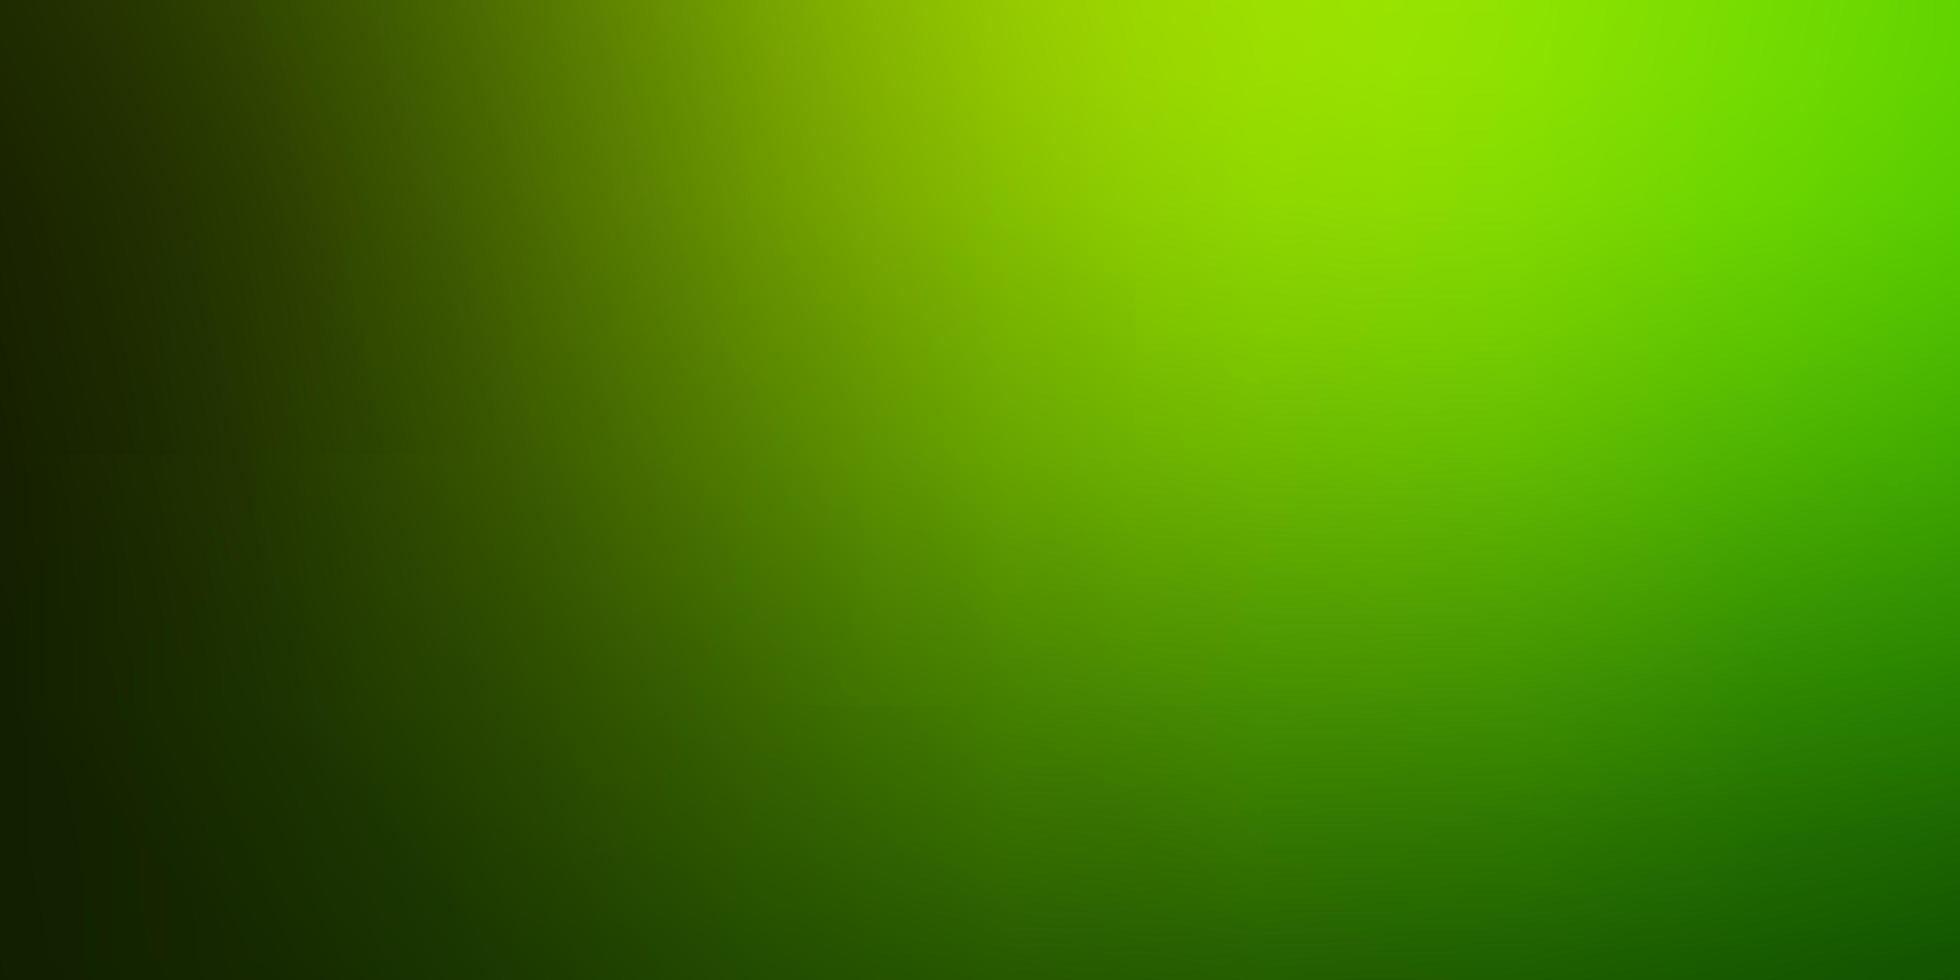 Light Green vector abstract layout.